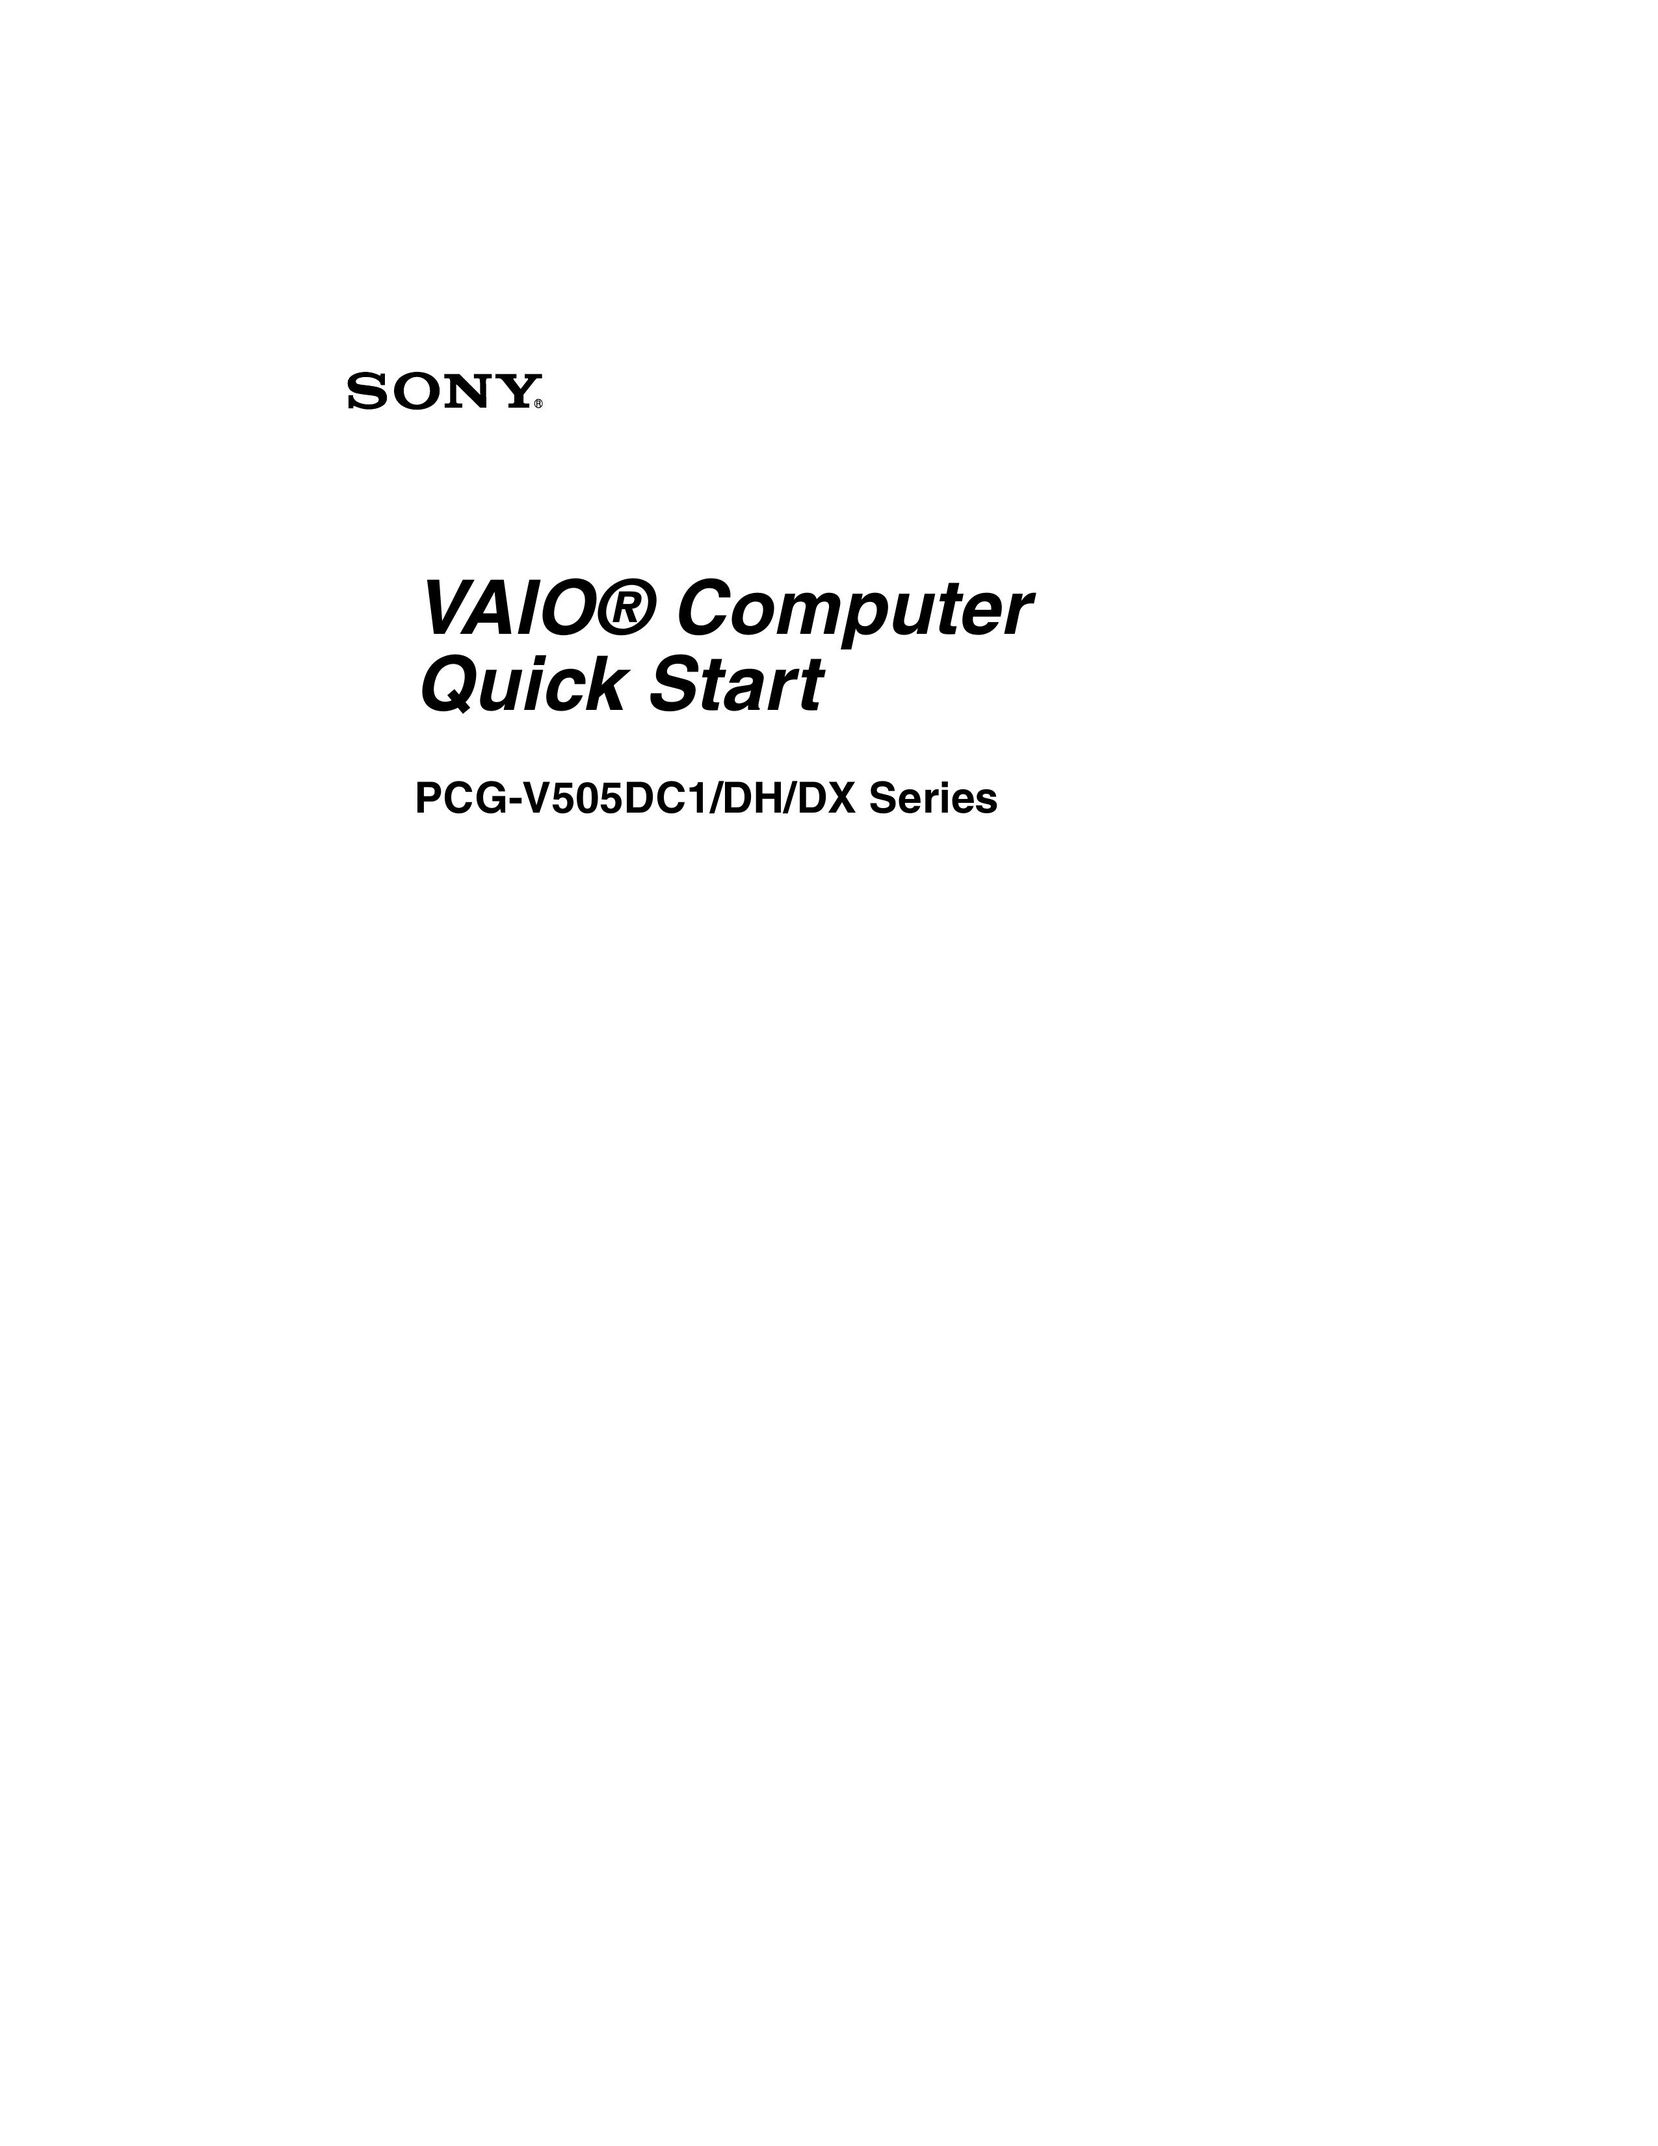 Sony PCG-V505DH Personal Computer User Manual